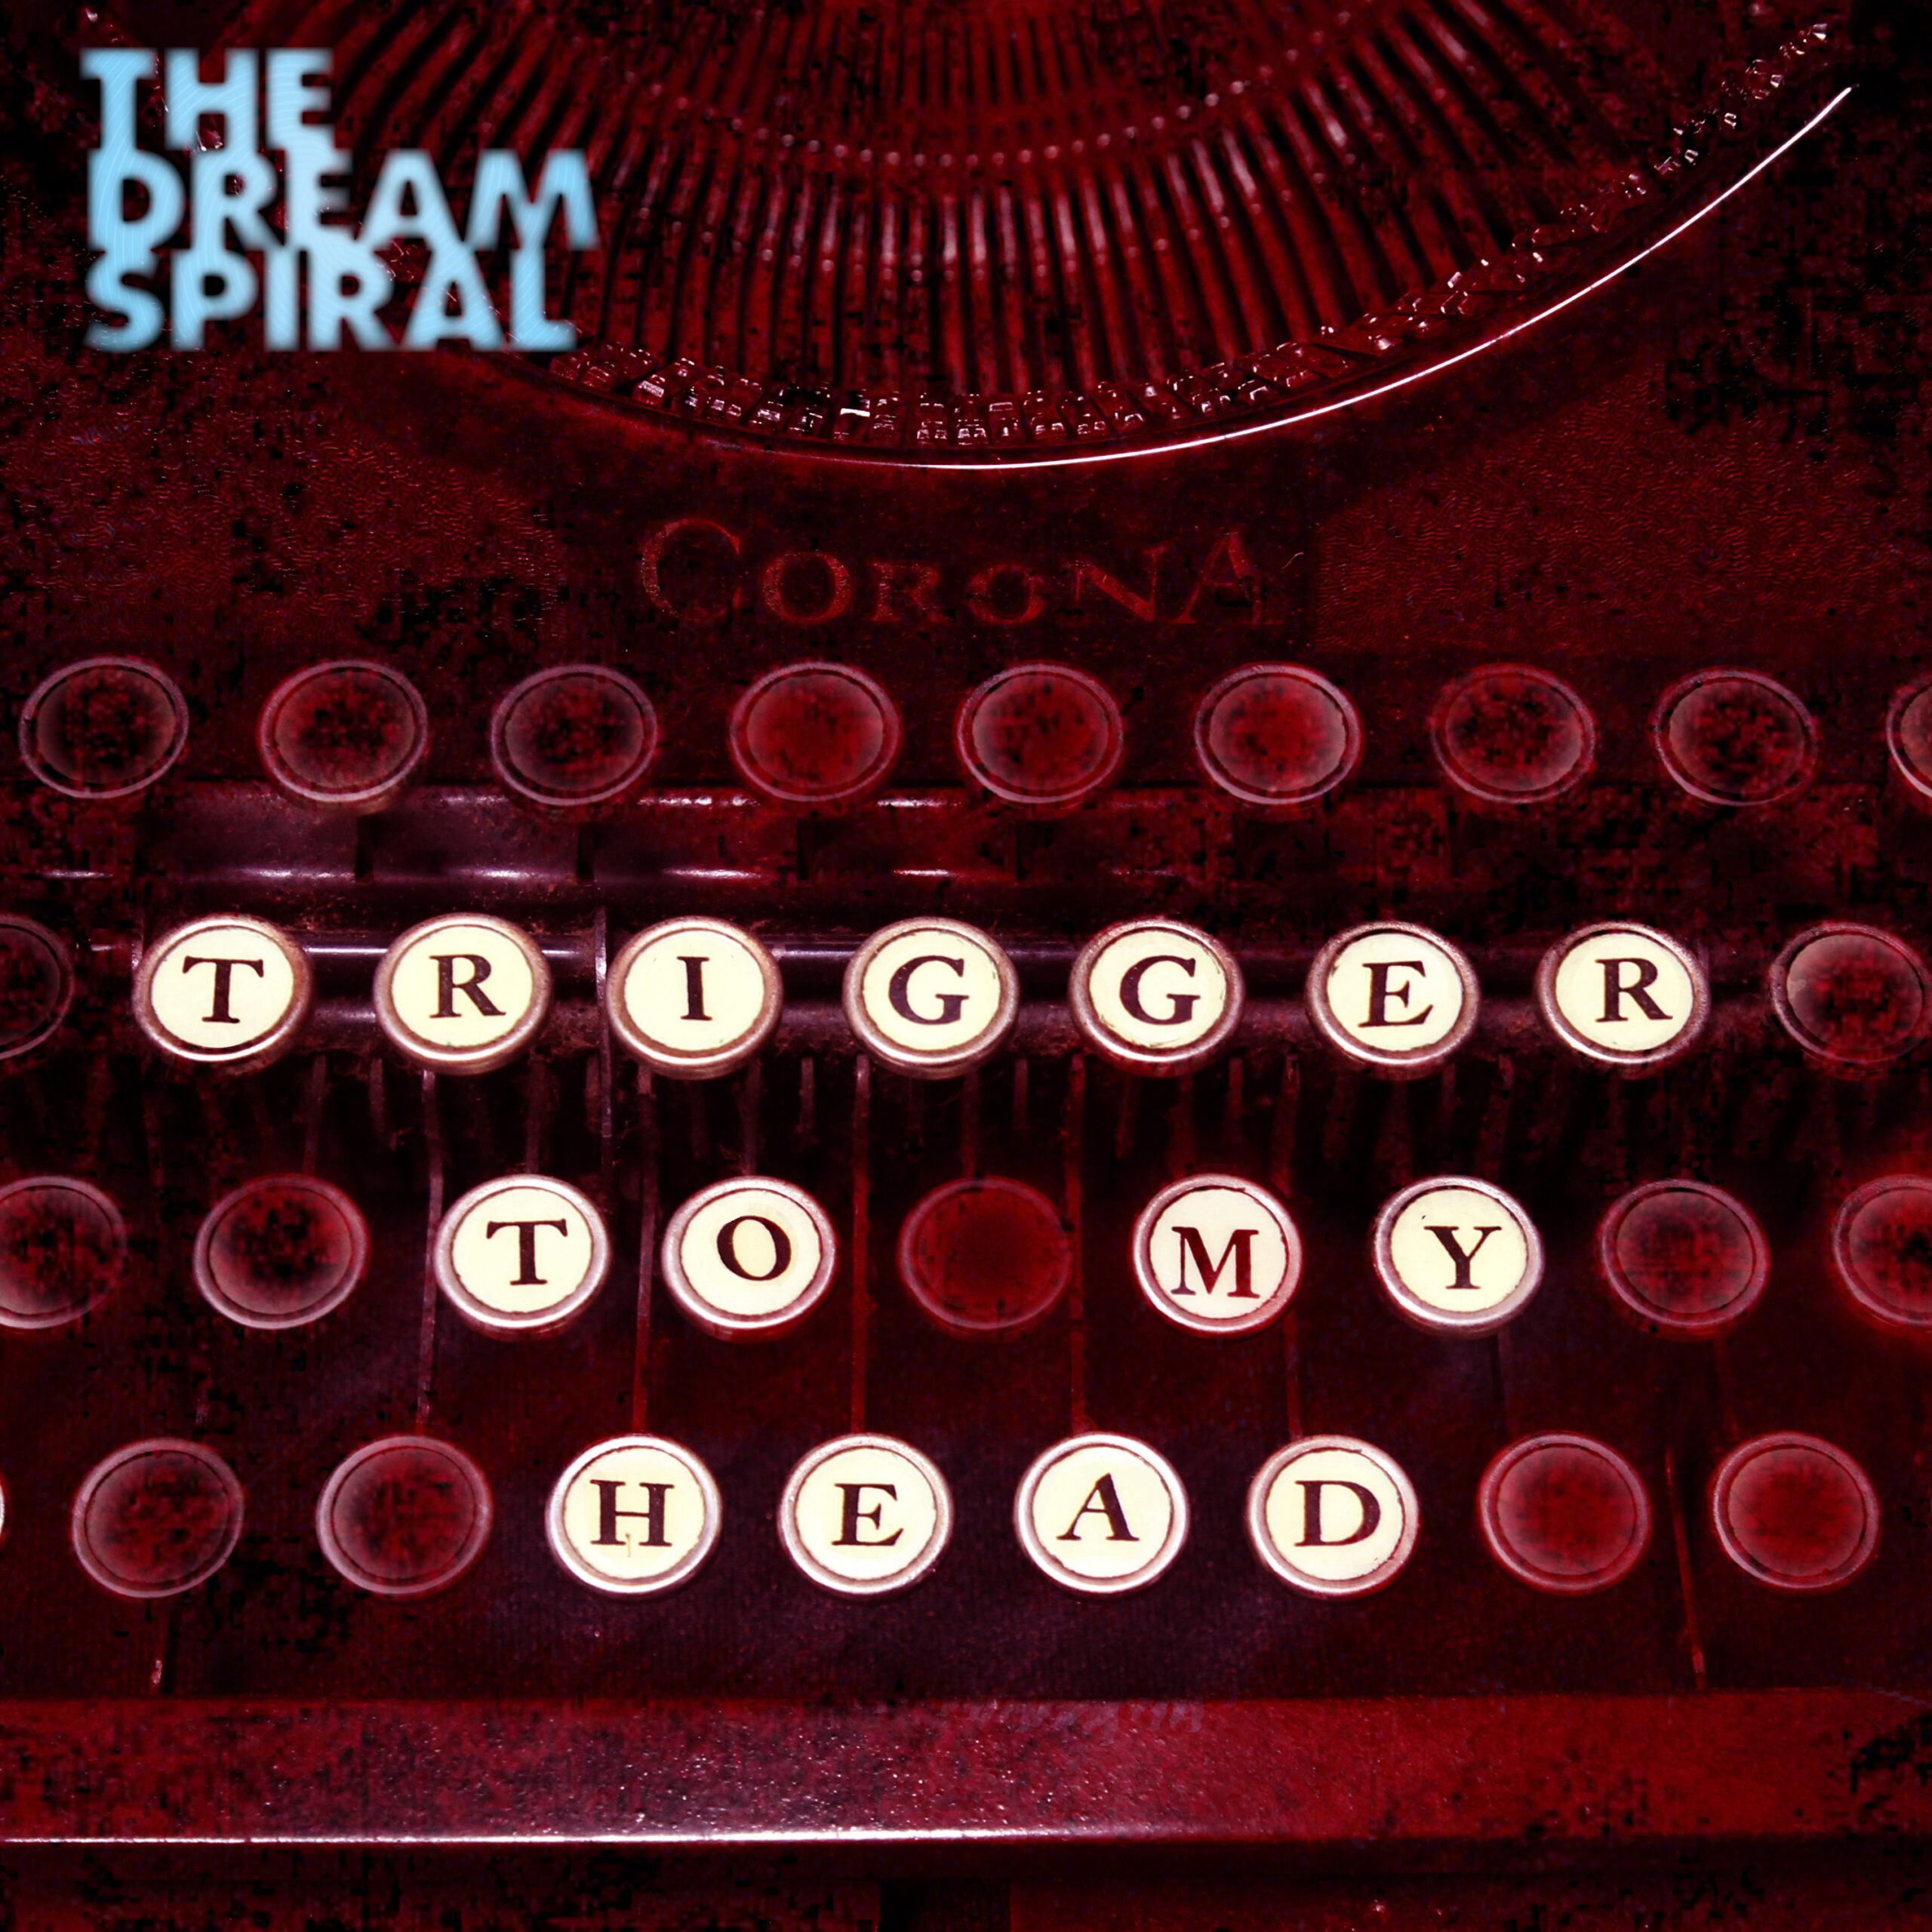 The Dream Spiral – “Trigger to My Head”